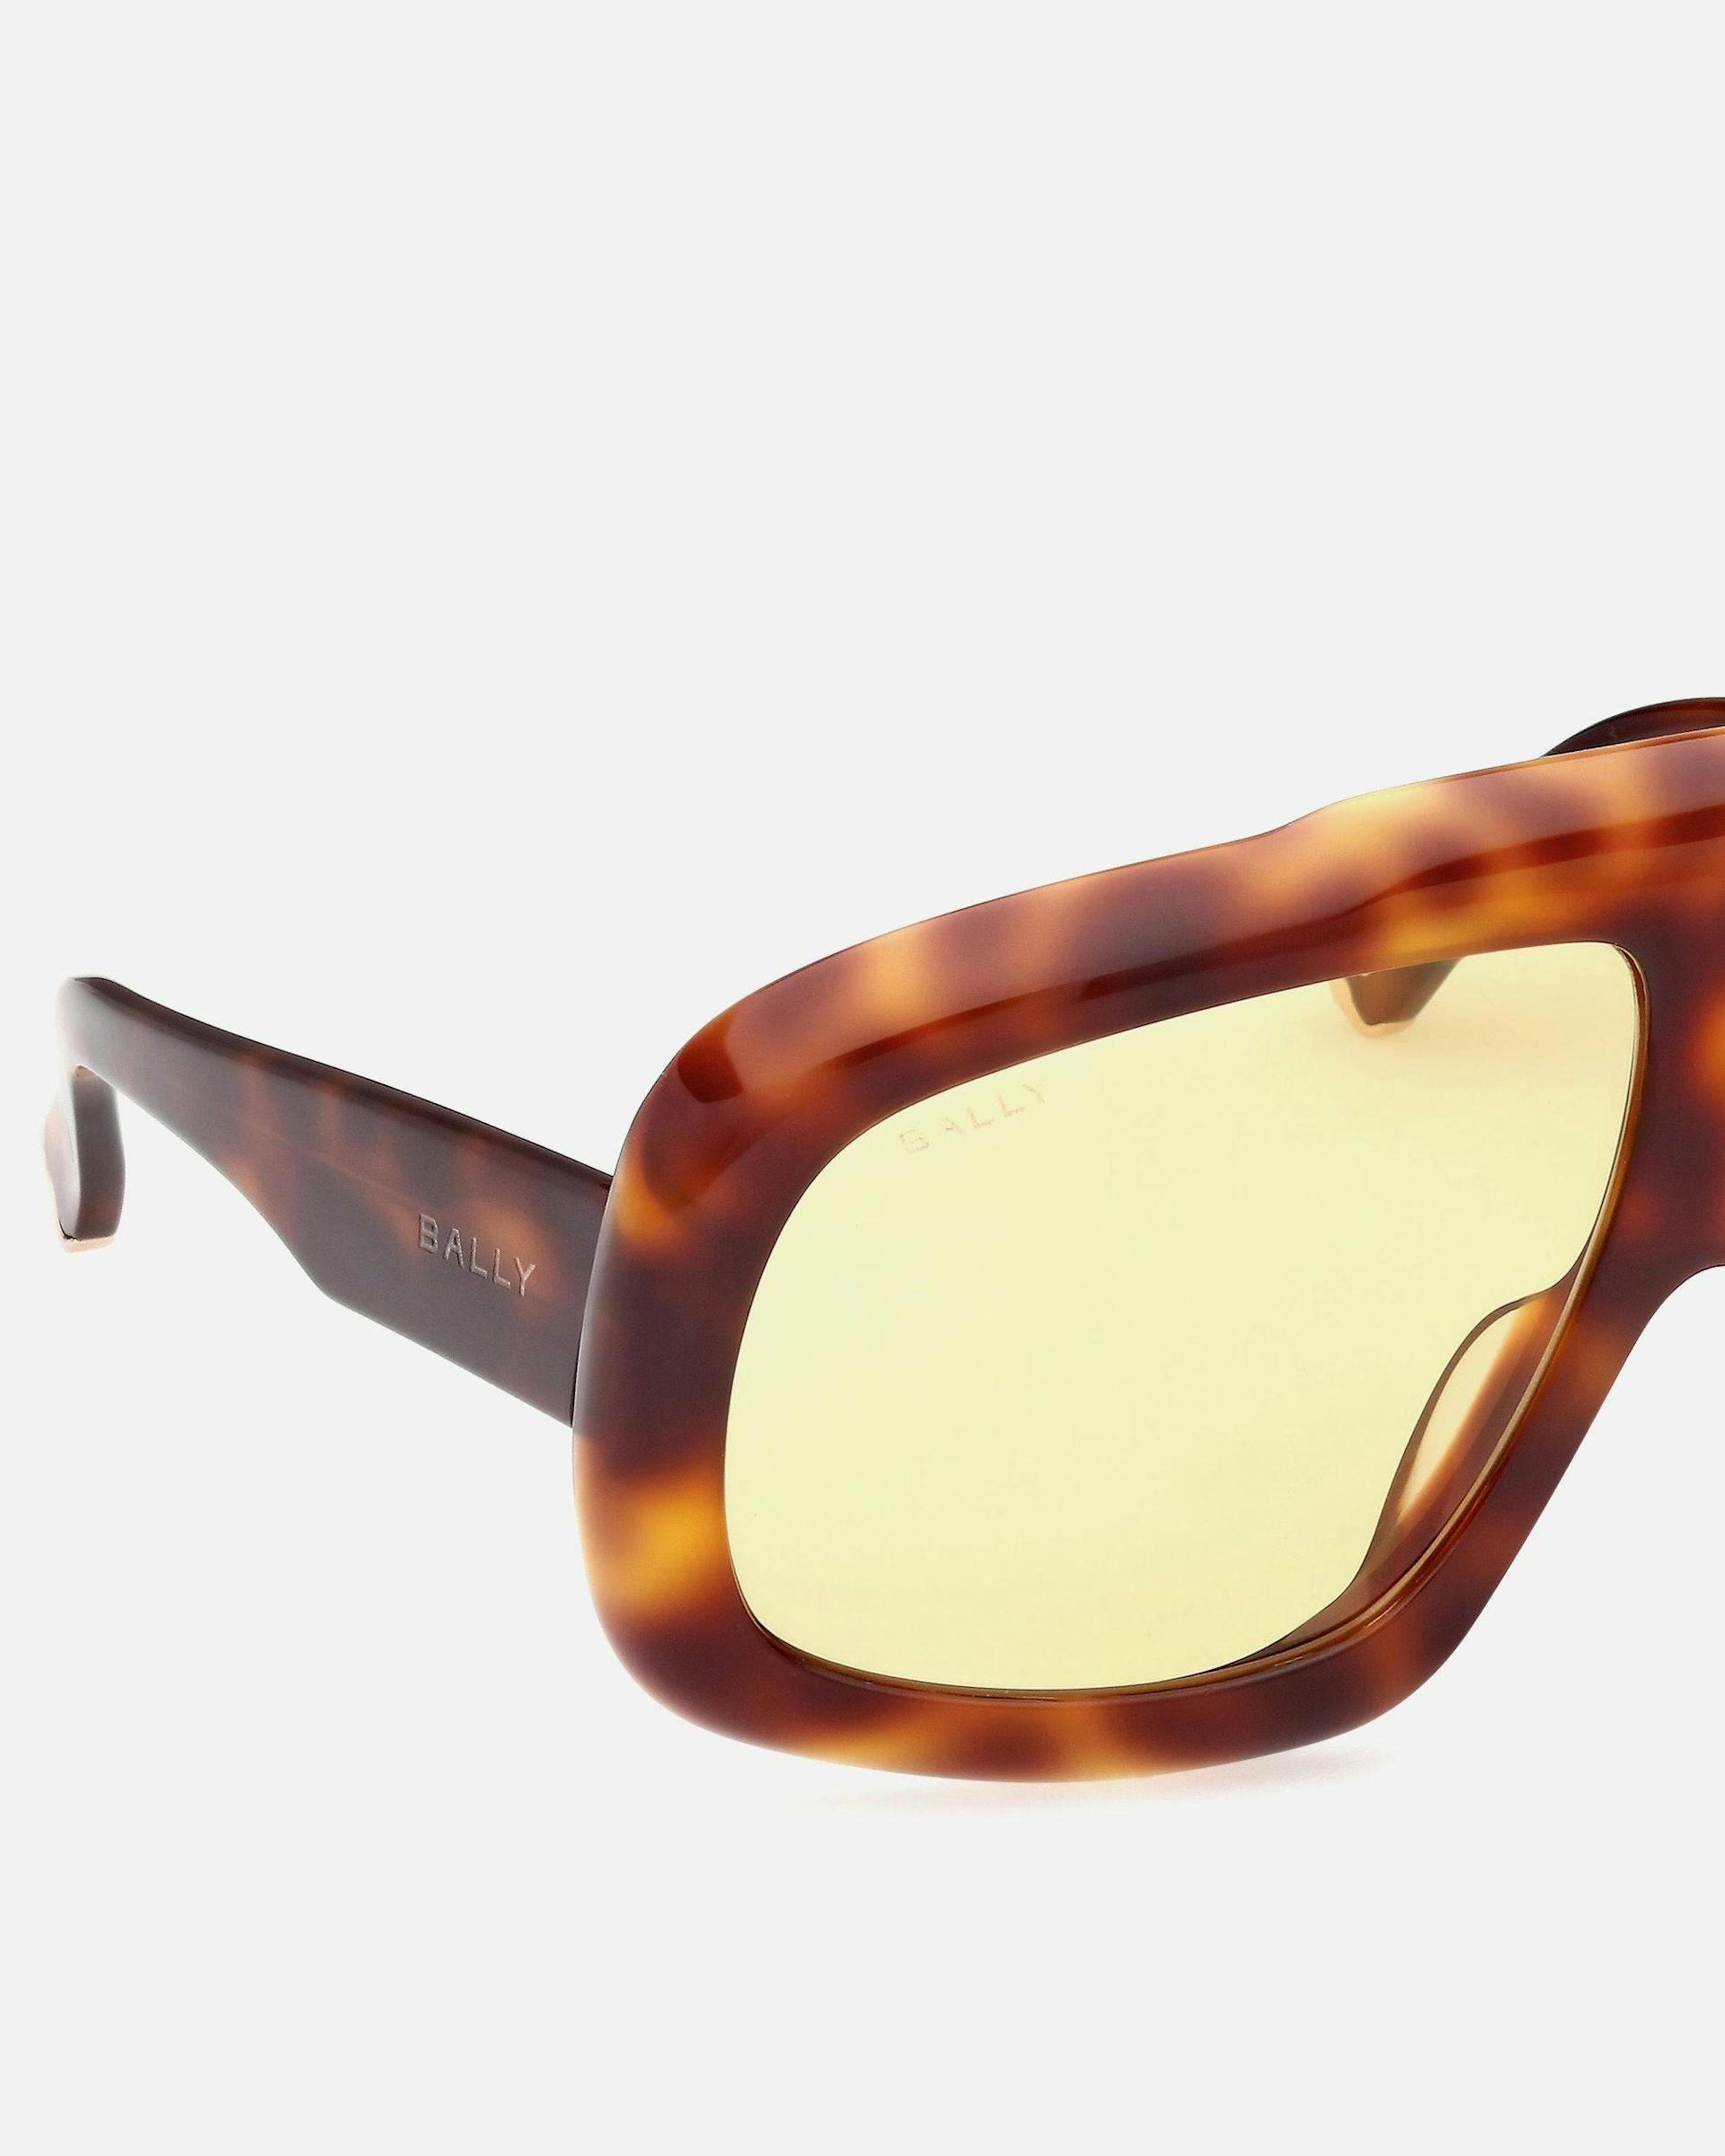 Eyger Acetate Sunglasses in Havana and Yellow | Bally | Still Life Detail